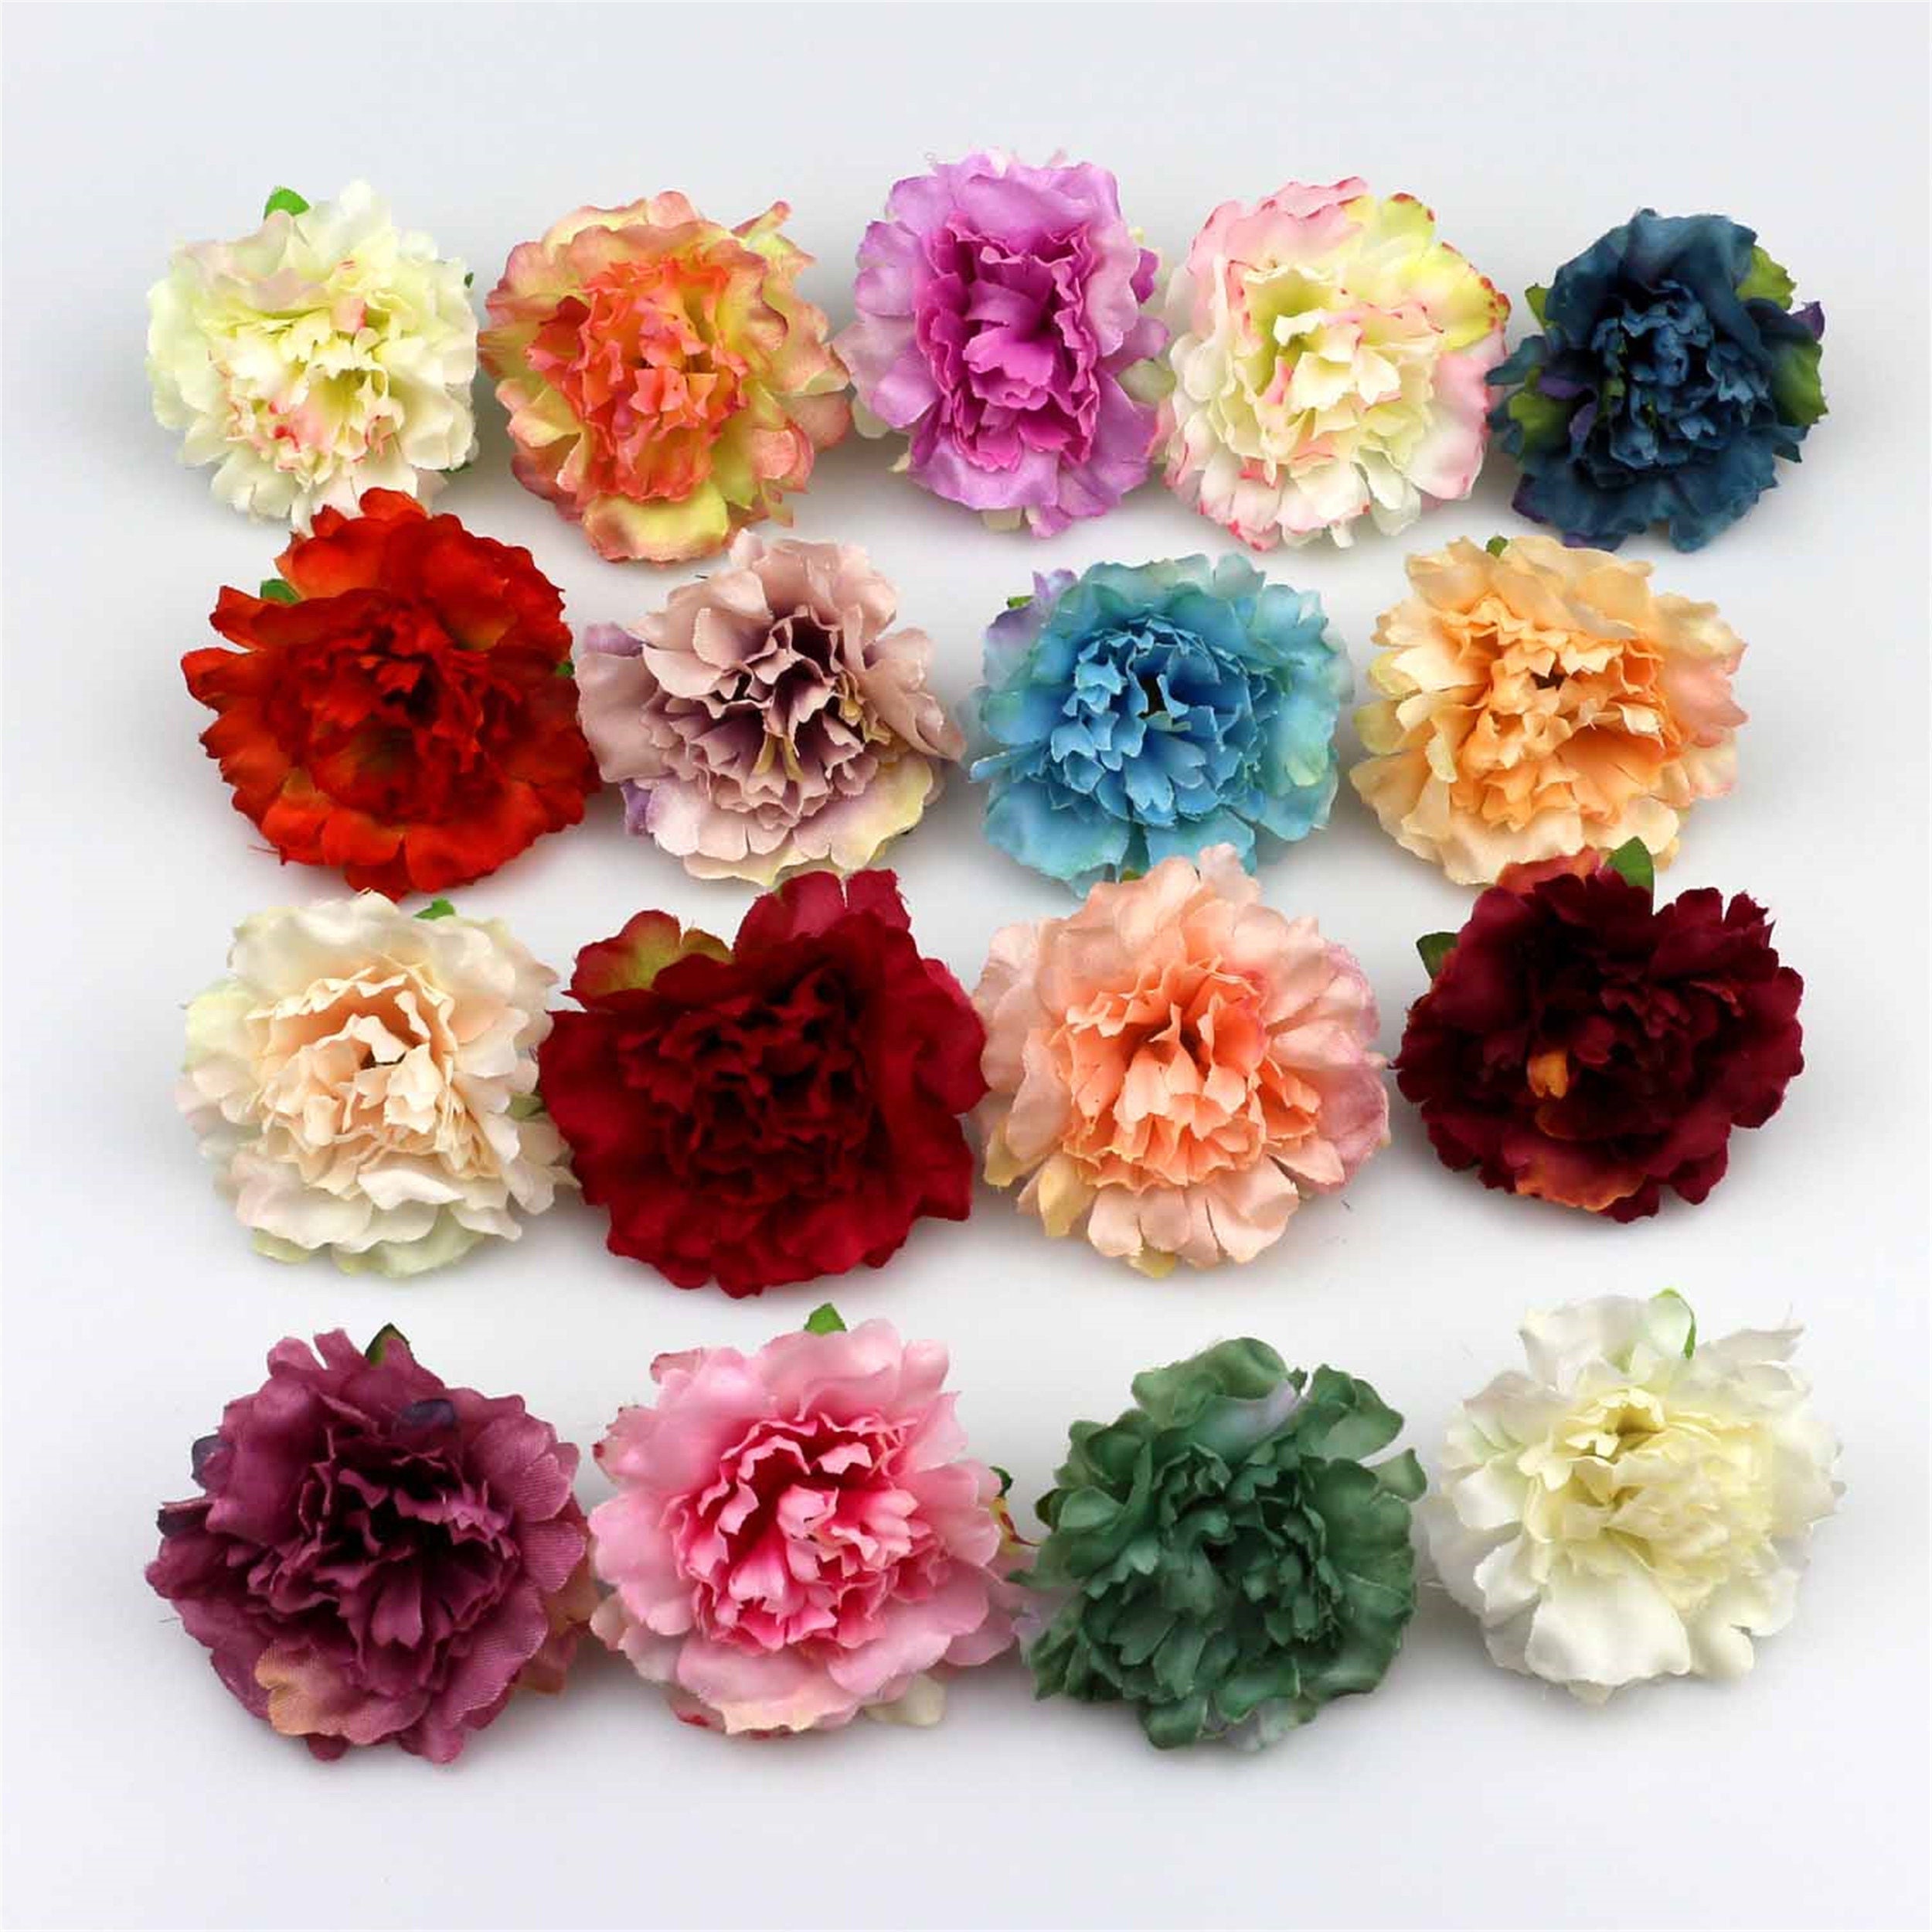 Wholesale 1000pcs Atificial Flowers Polyester Wedding Decorations